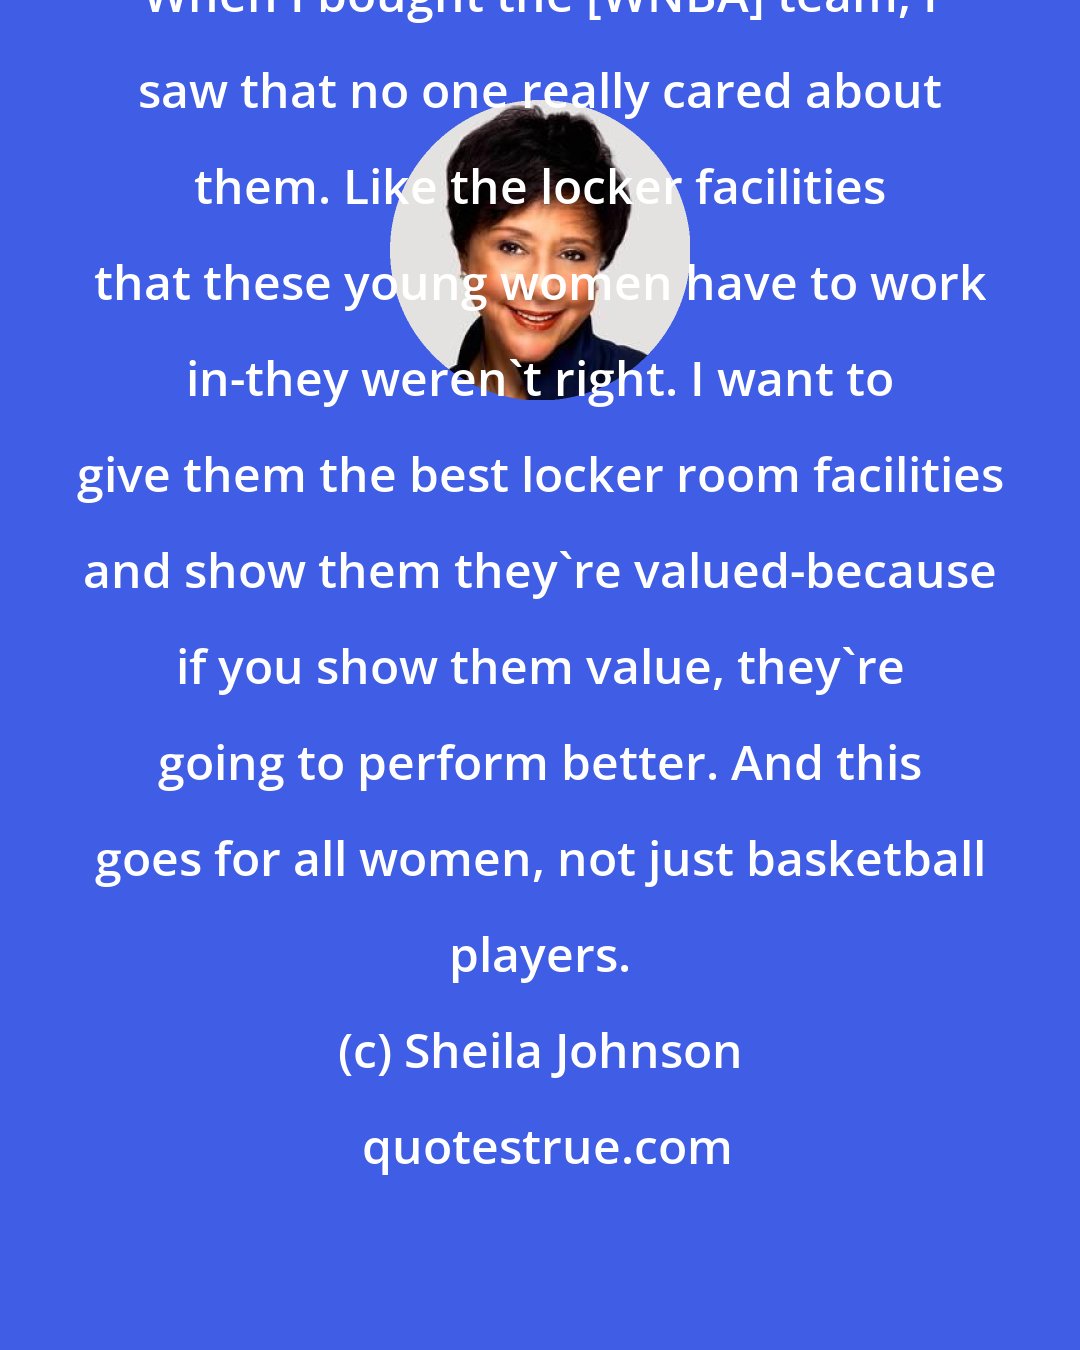 Sheila Johnson: When I bought the [WNBA] team, I saw that no one really cared about them. Like the locker facilities that these young women have to work in-they weren't right. I want to give them the best locker room facilities and show them they're valued-because if you show them value, they're going to perform better. And this goes for all women, not just basketball players.